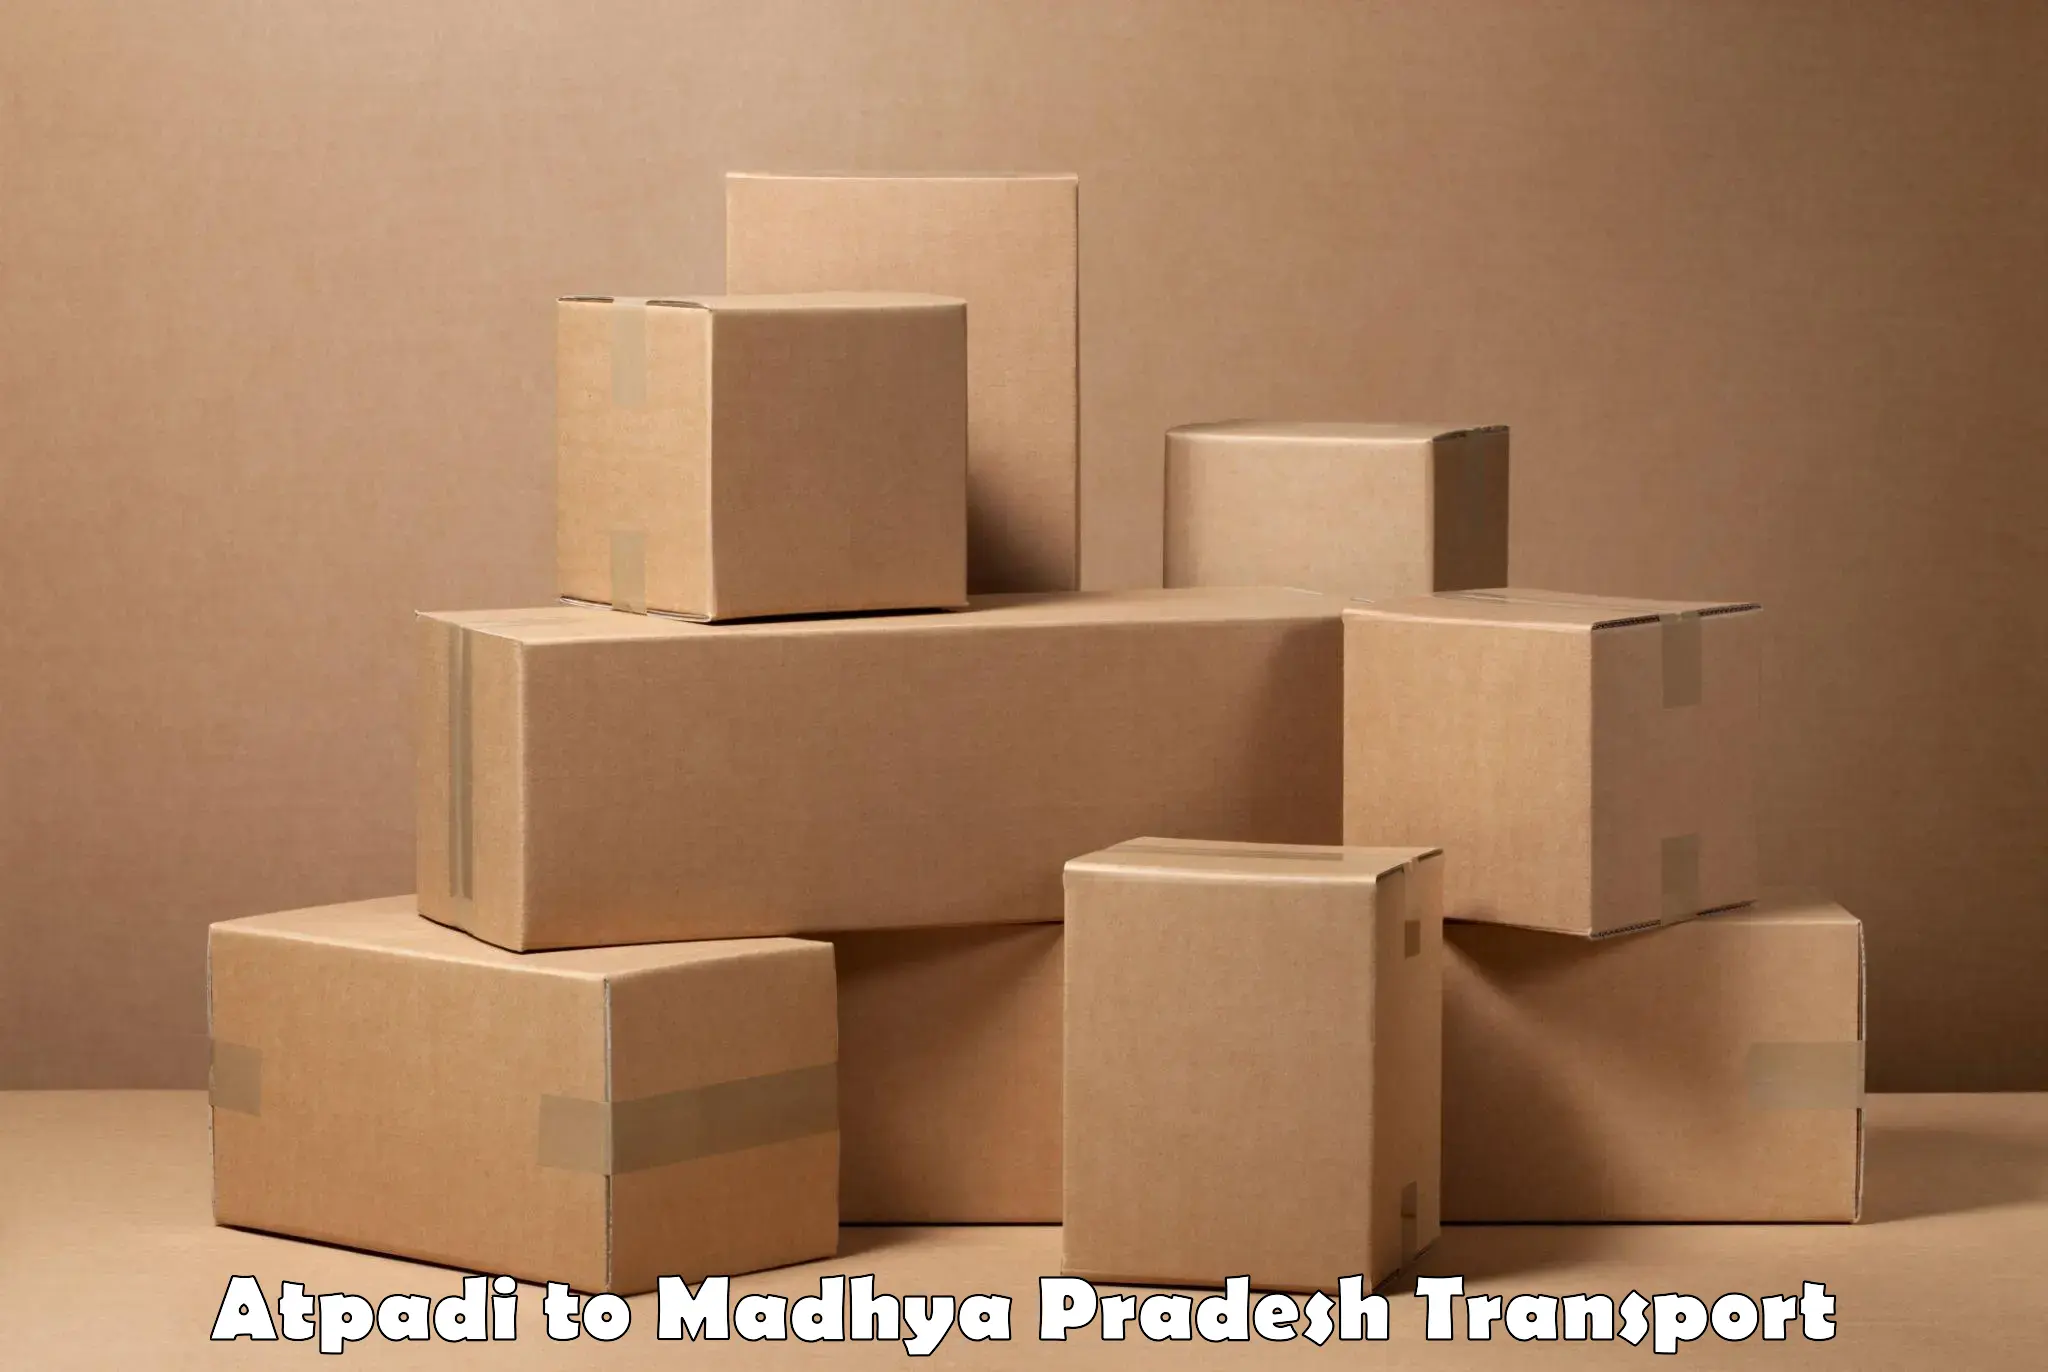 Truck transport companies in India in Atpadi to Deosar